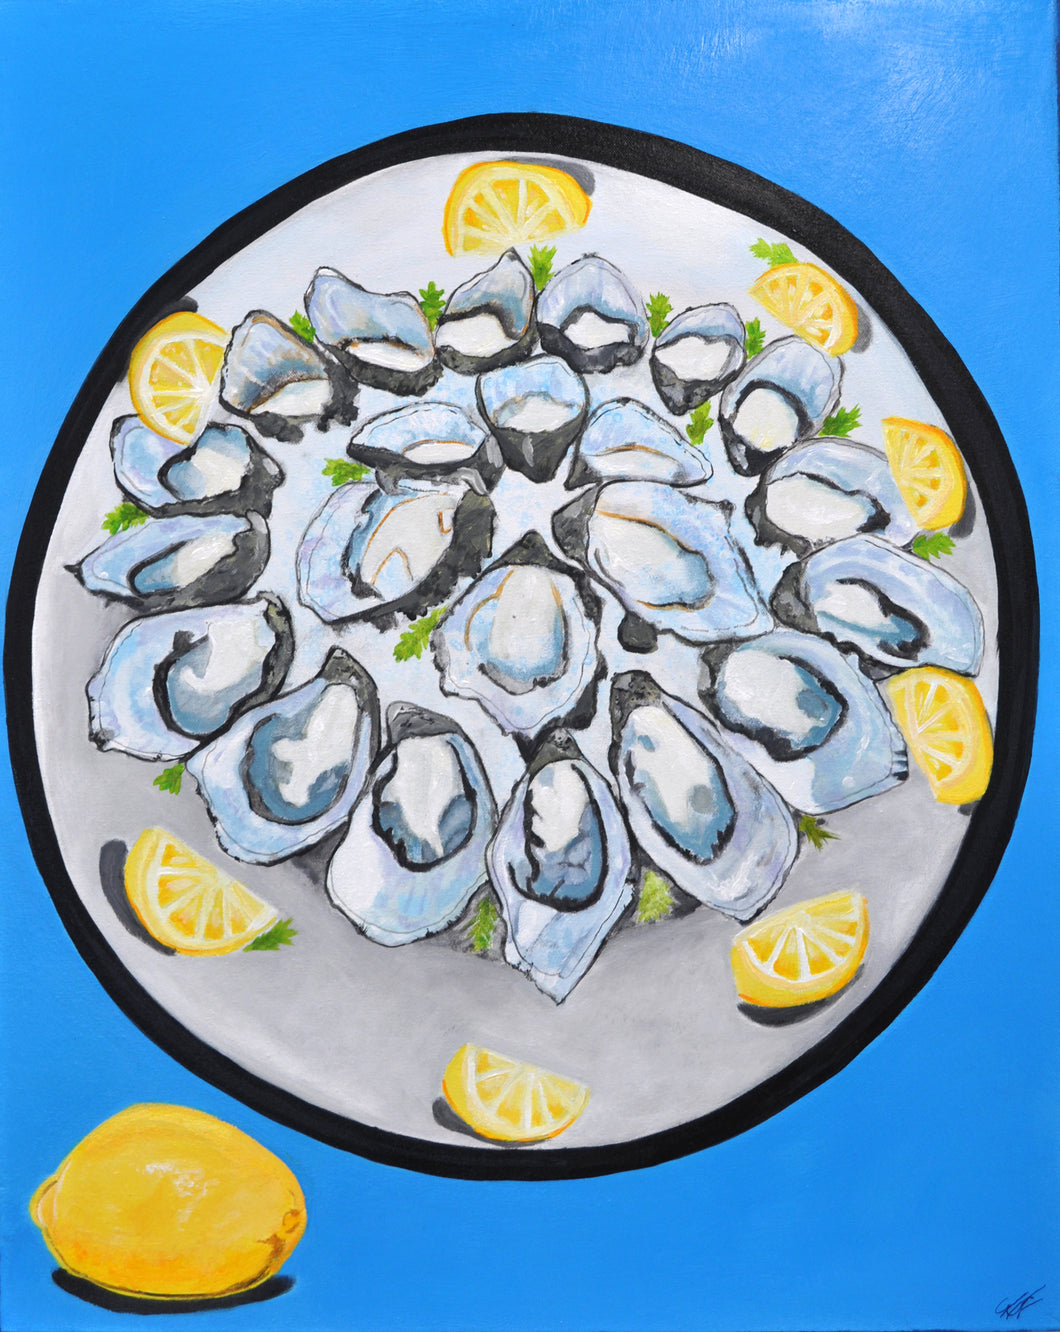 A Plate of Oysters